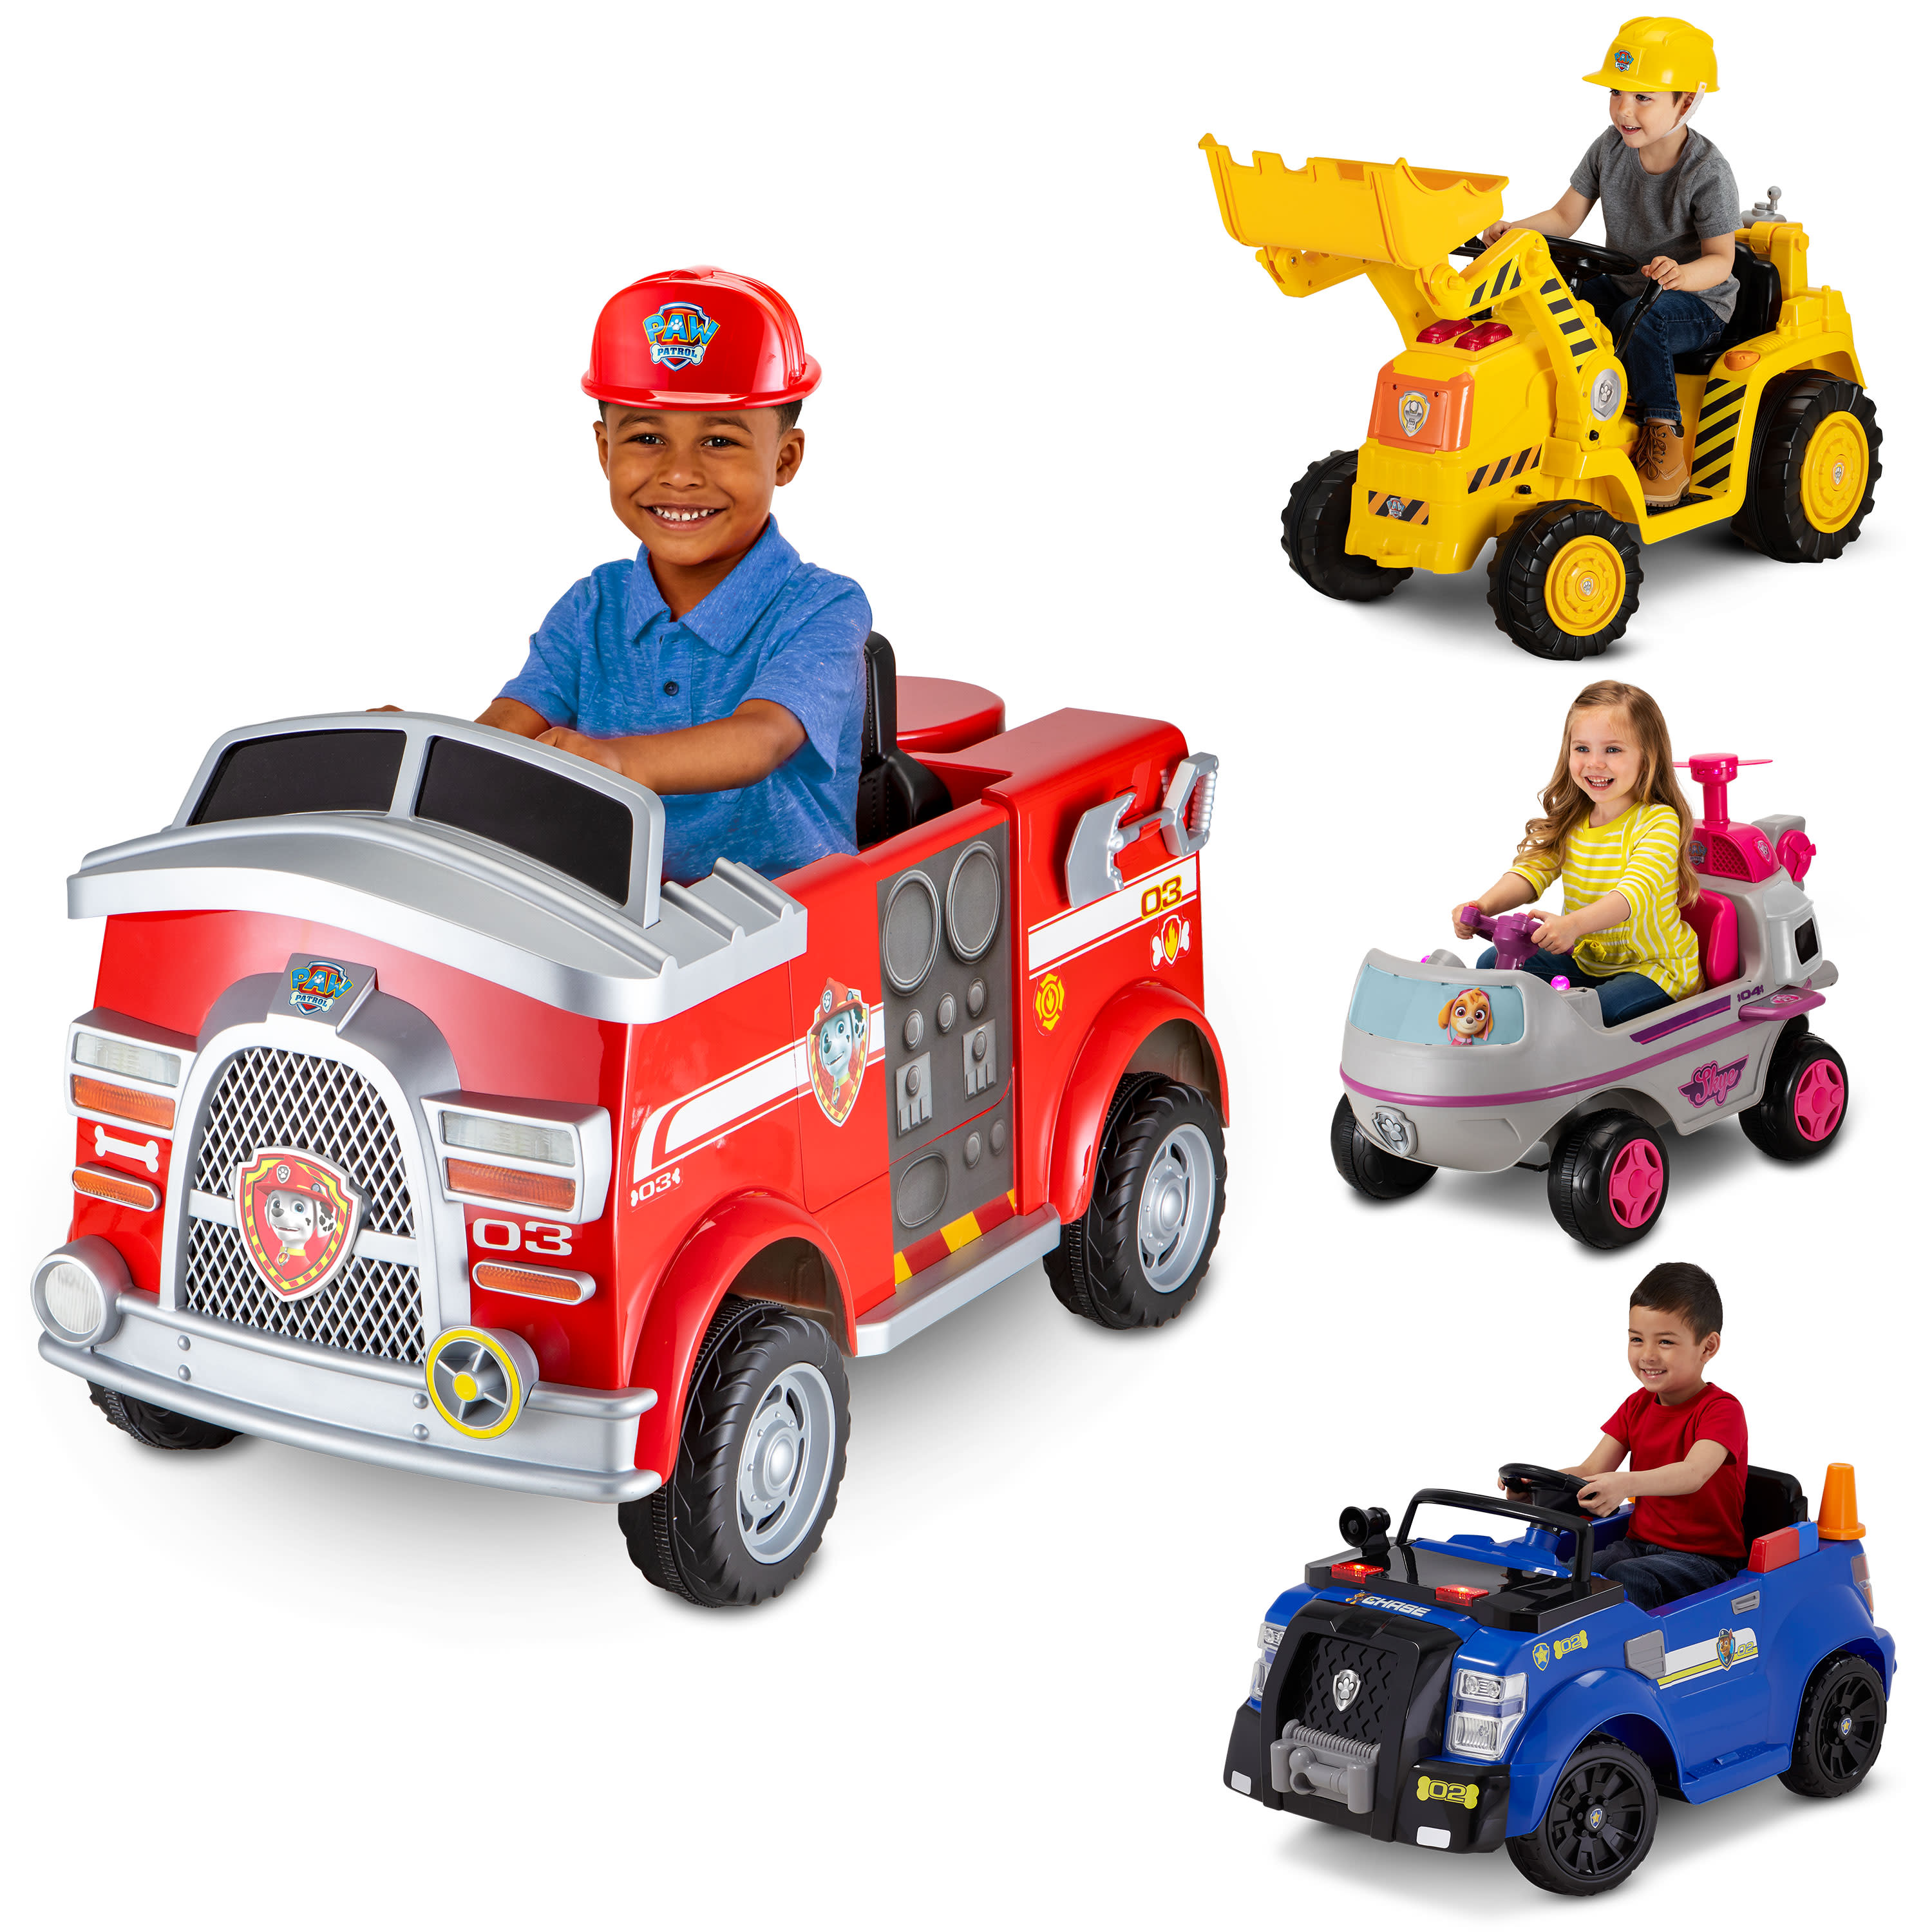 Nickelodeon's PAW Patrol: Marshall Rescue Fire Truck, Ride-On Toy by Kid Trax - image 1 of 10